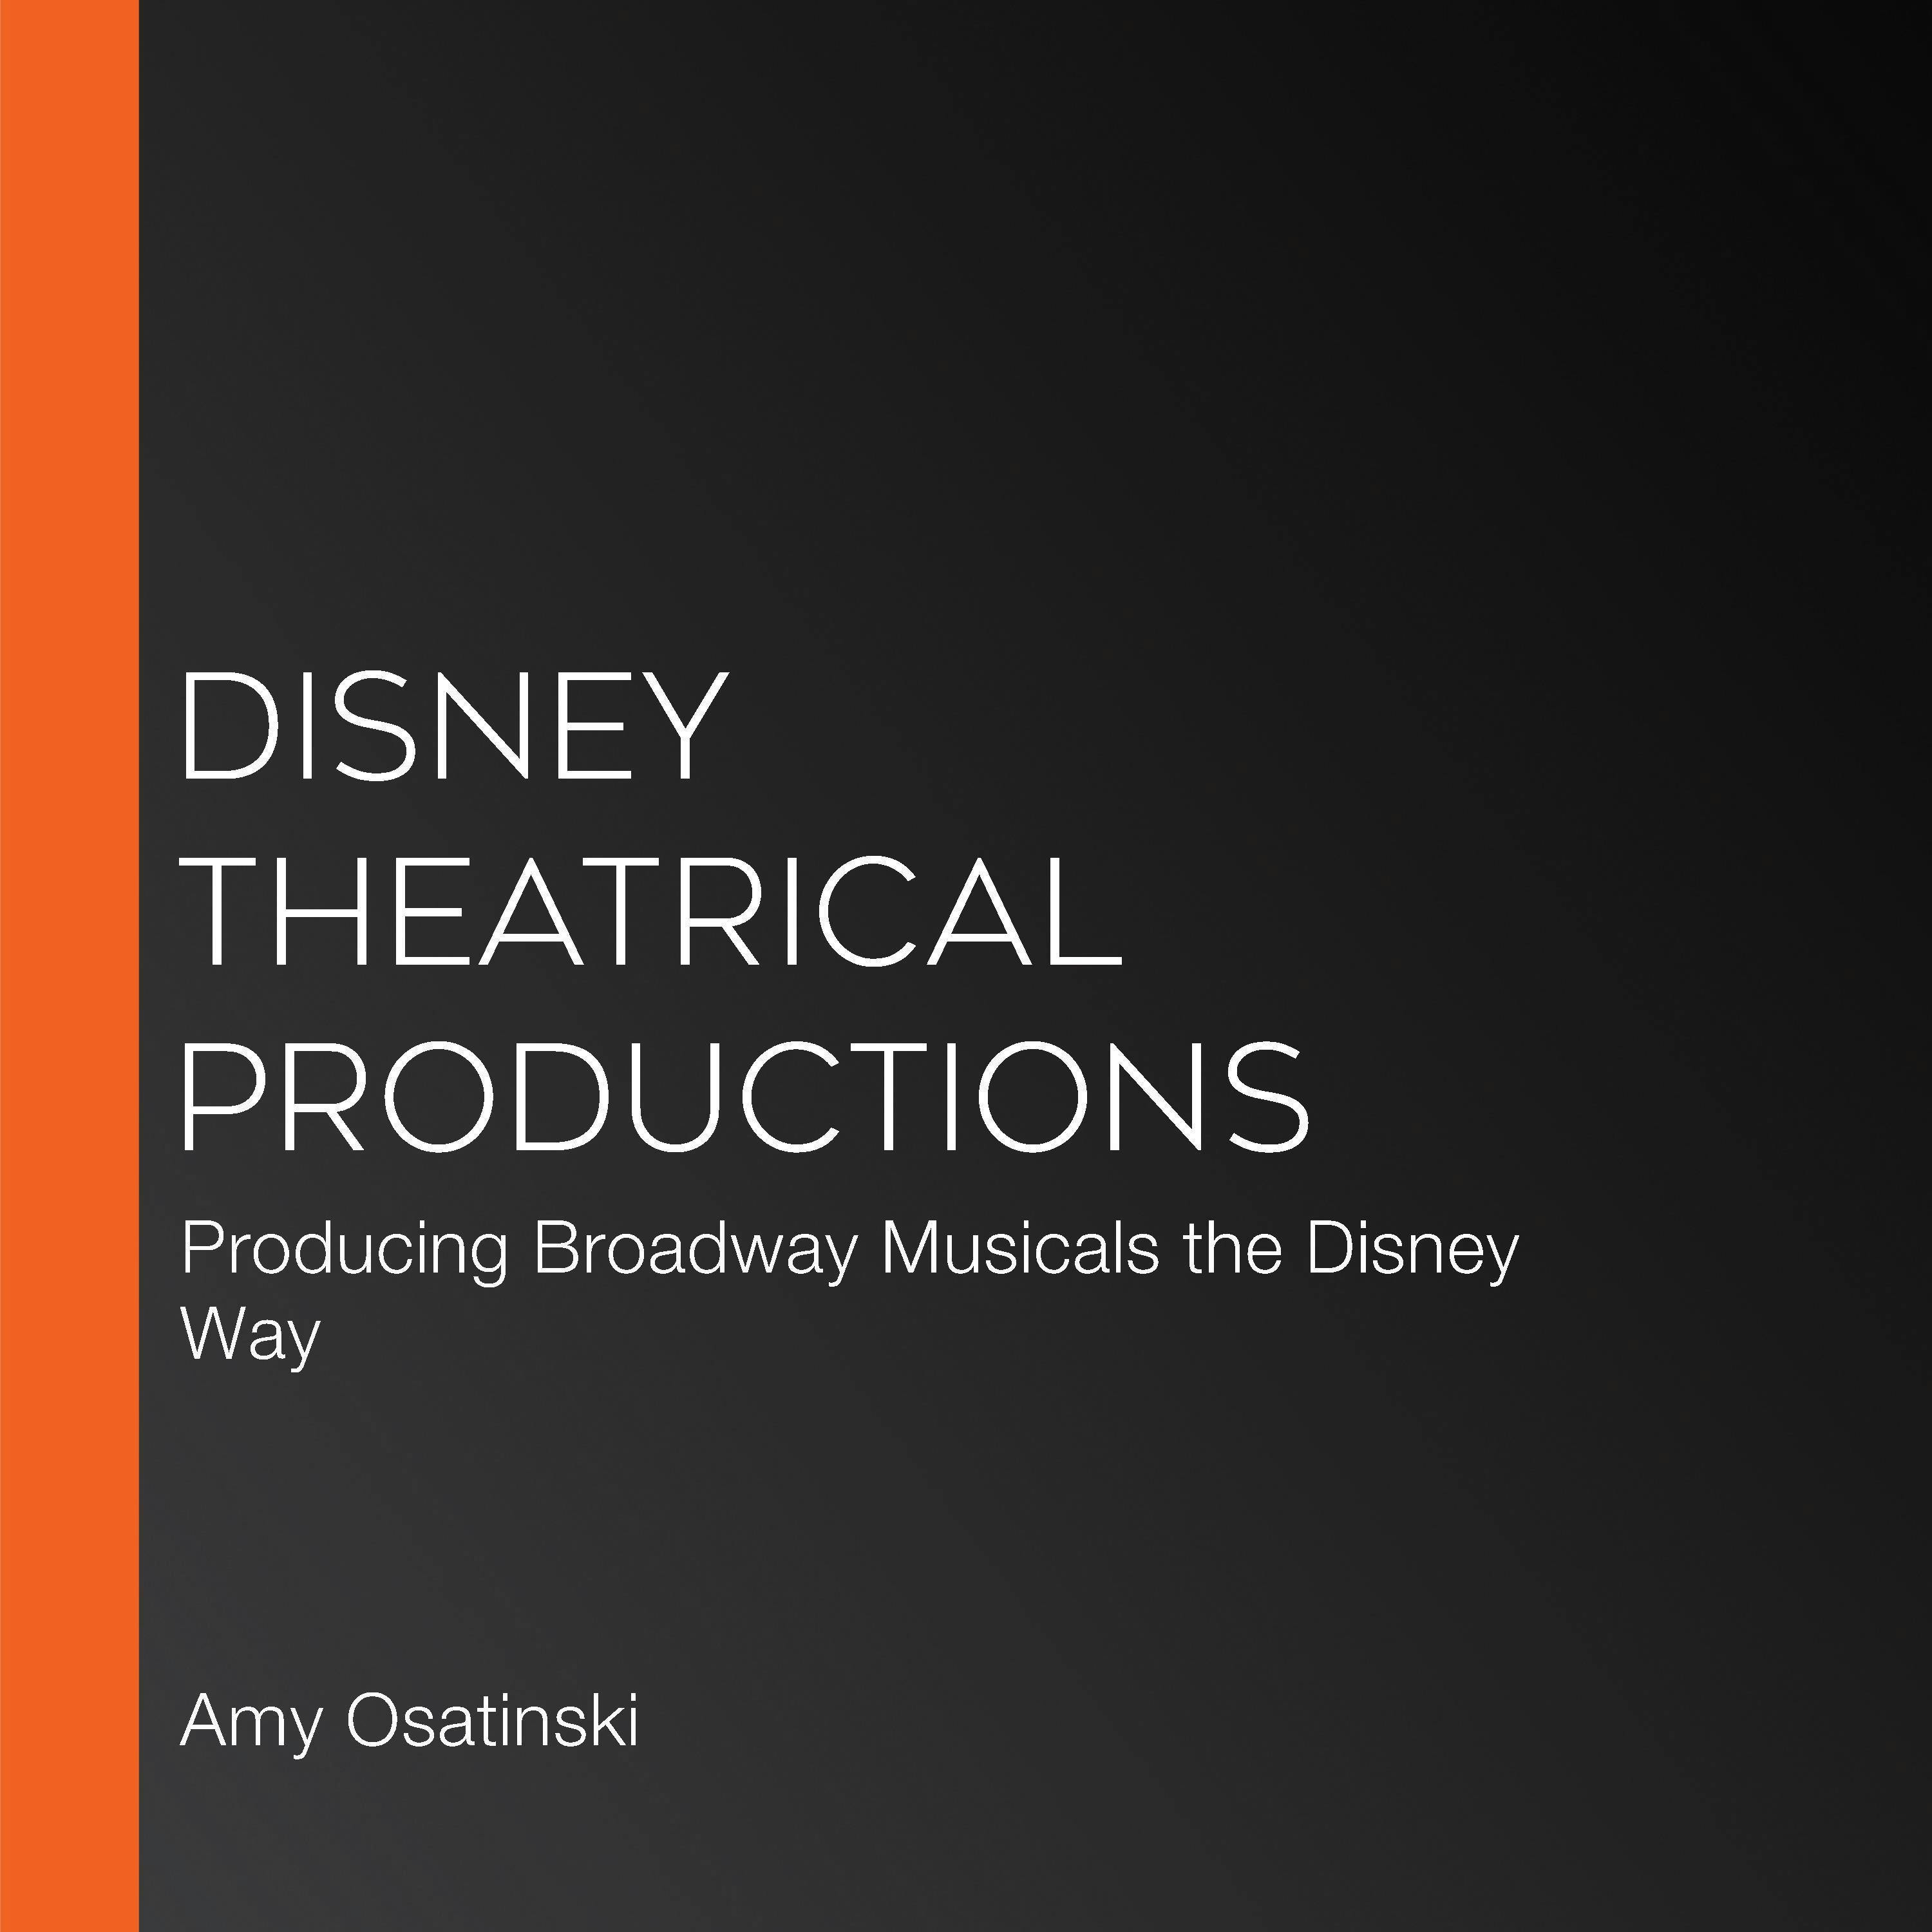 Disney Theatrical Productions: Producing Broadway Musicals the Disney Way - Amy Osatinski